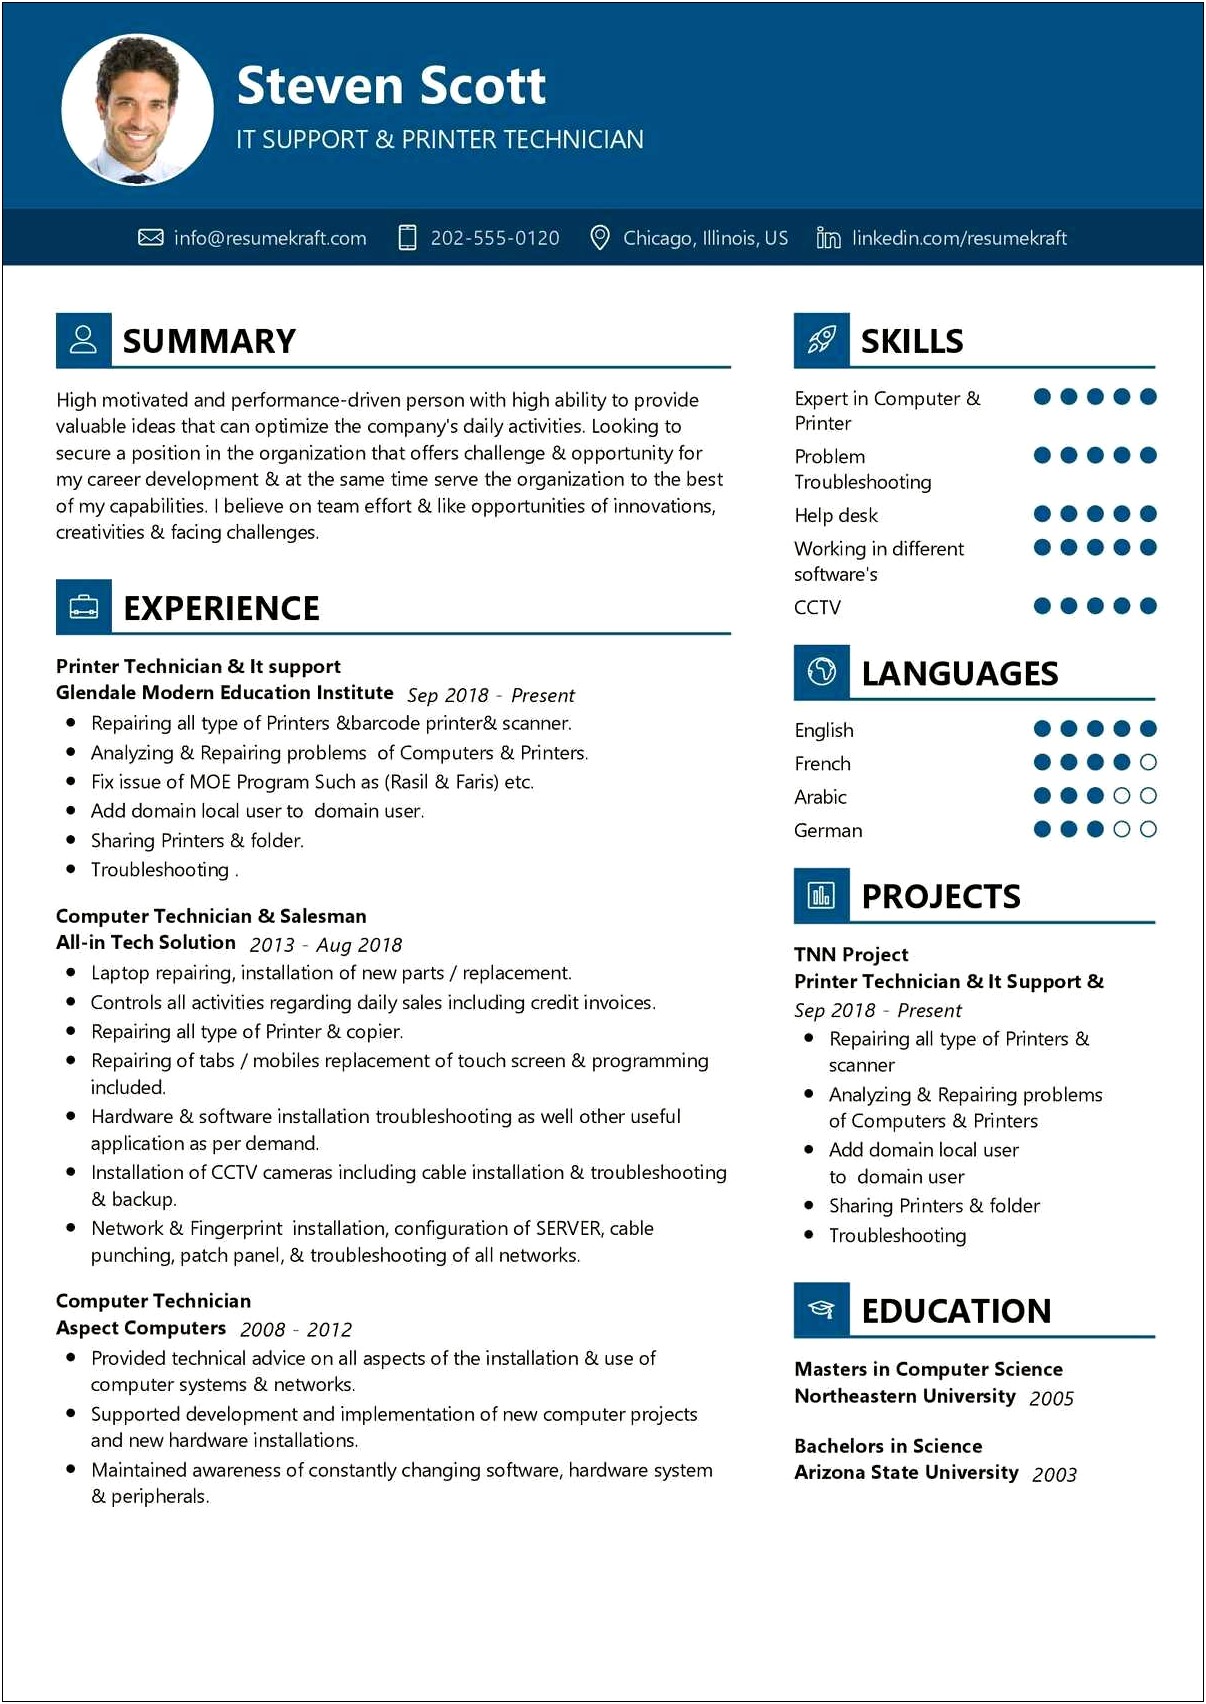 Resume For Computer Technician With No Experience